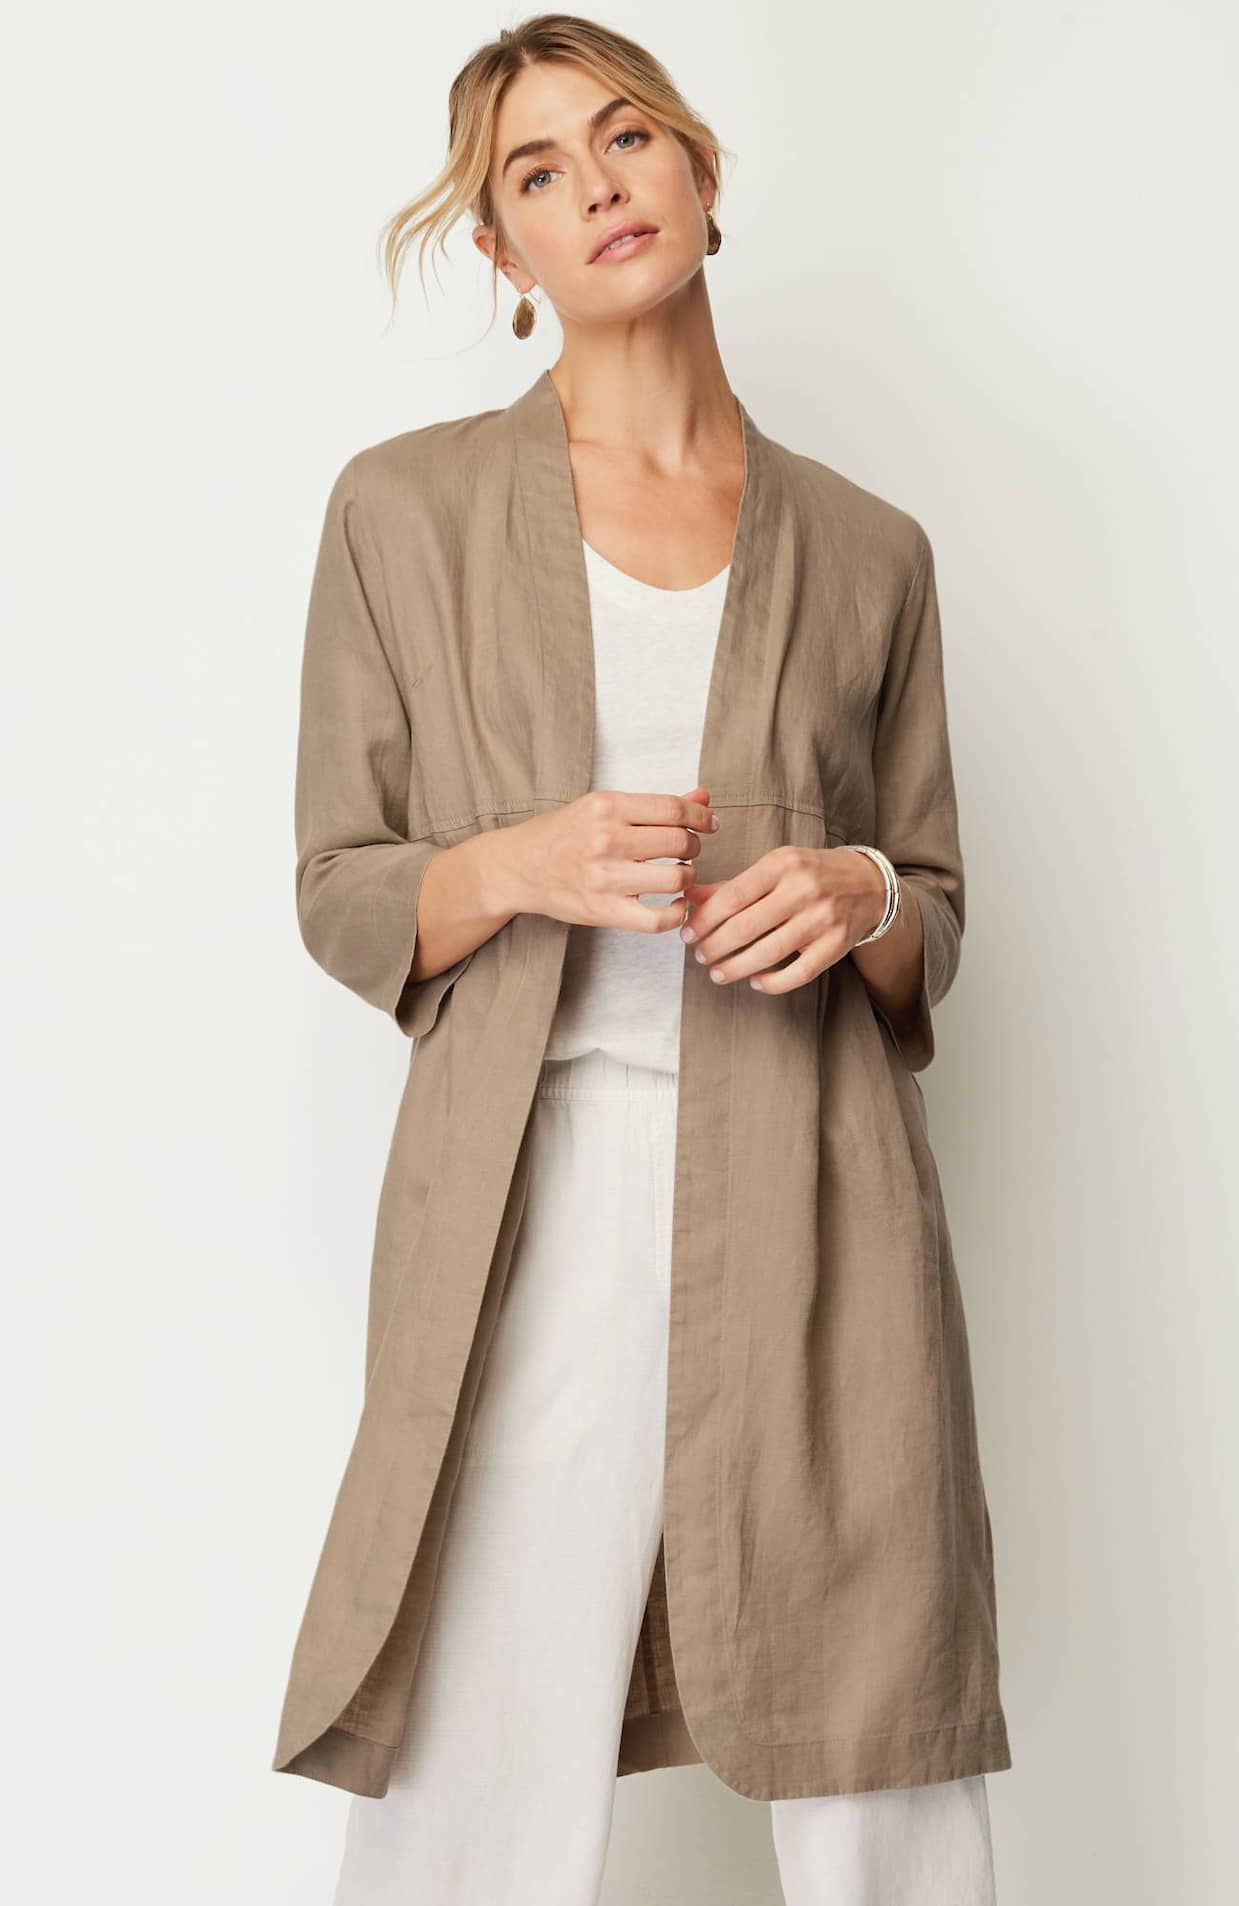 J. Jill Linen Blend Soft Sand Ribbed Duster Cardigan Size XSP  Cardigan  sweaters for women, Clothes design, Duster cardigan